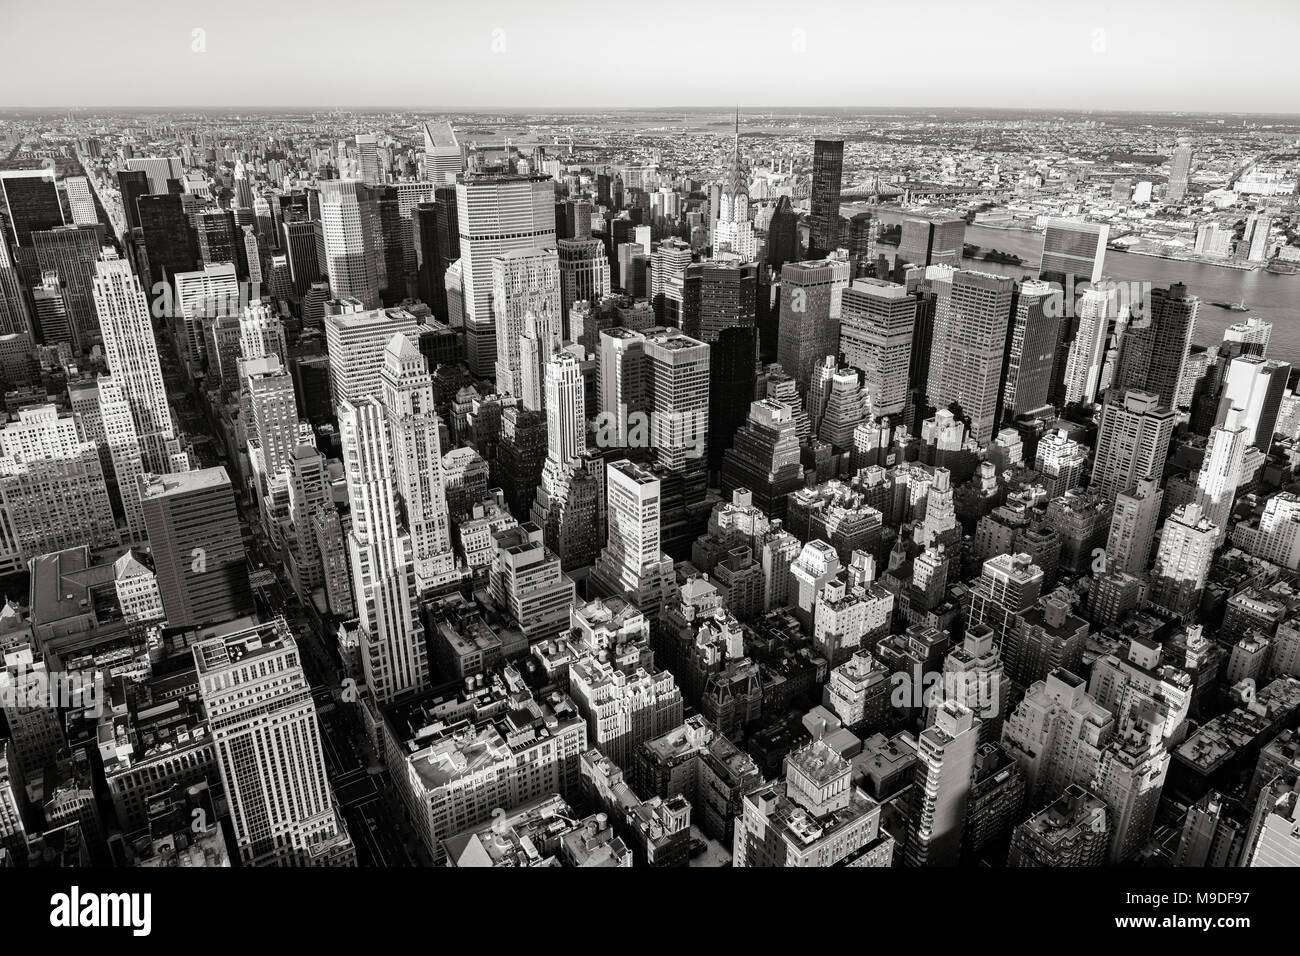 Aerial view of Midtown skyscrapers in Black & White, Cityscape, Manhattan, New York CIty Stock Photo